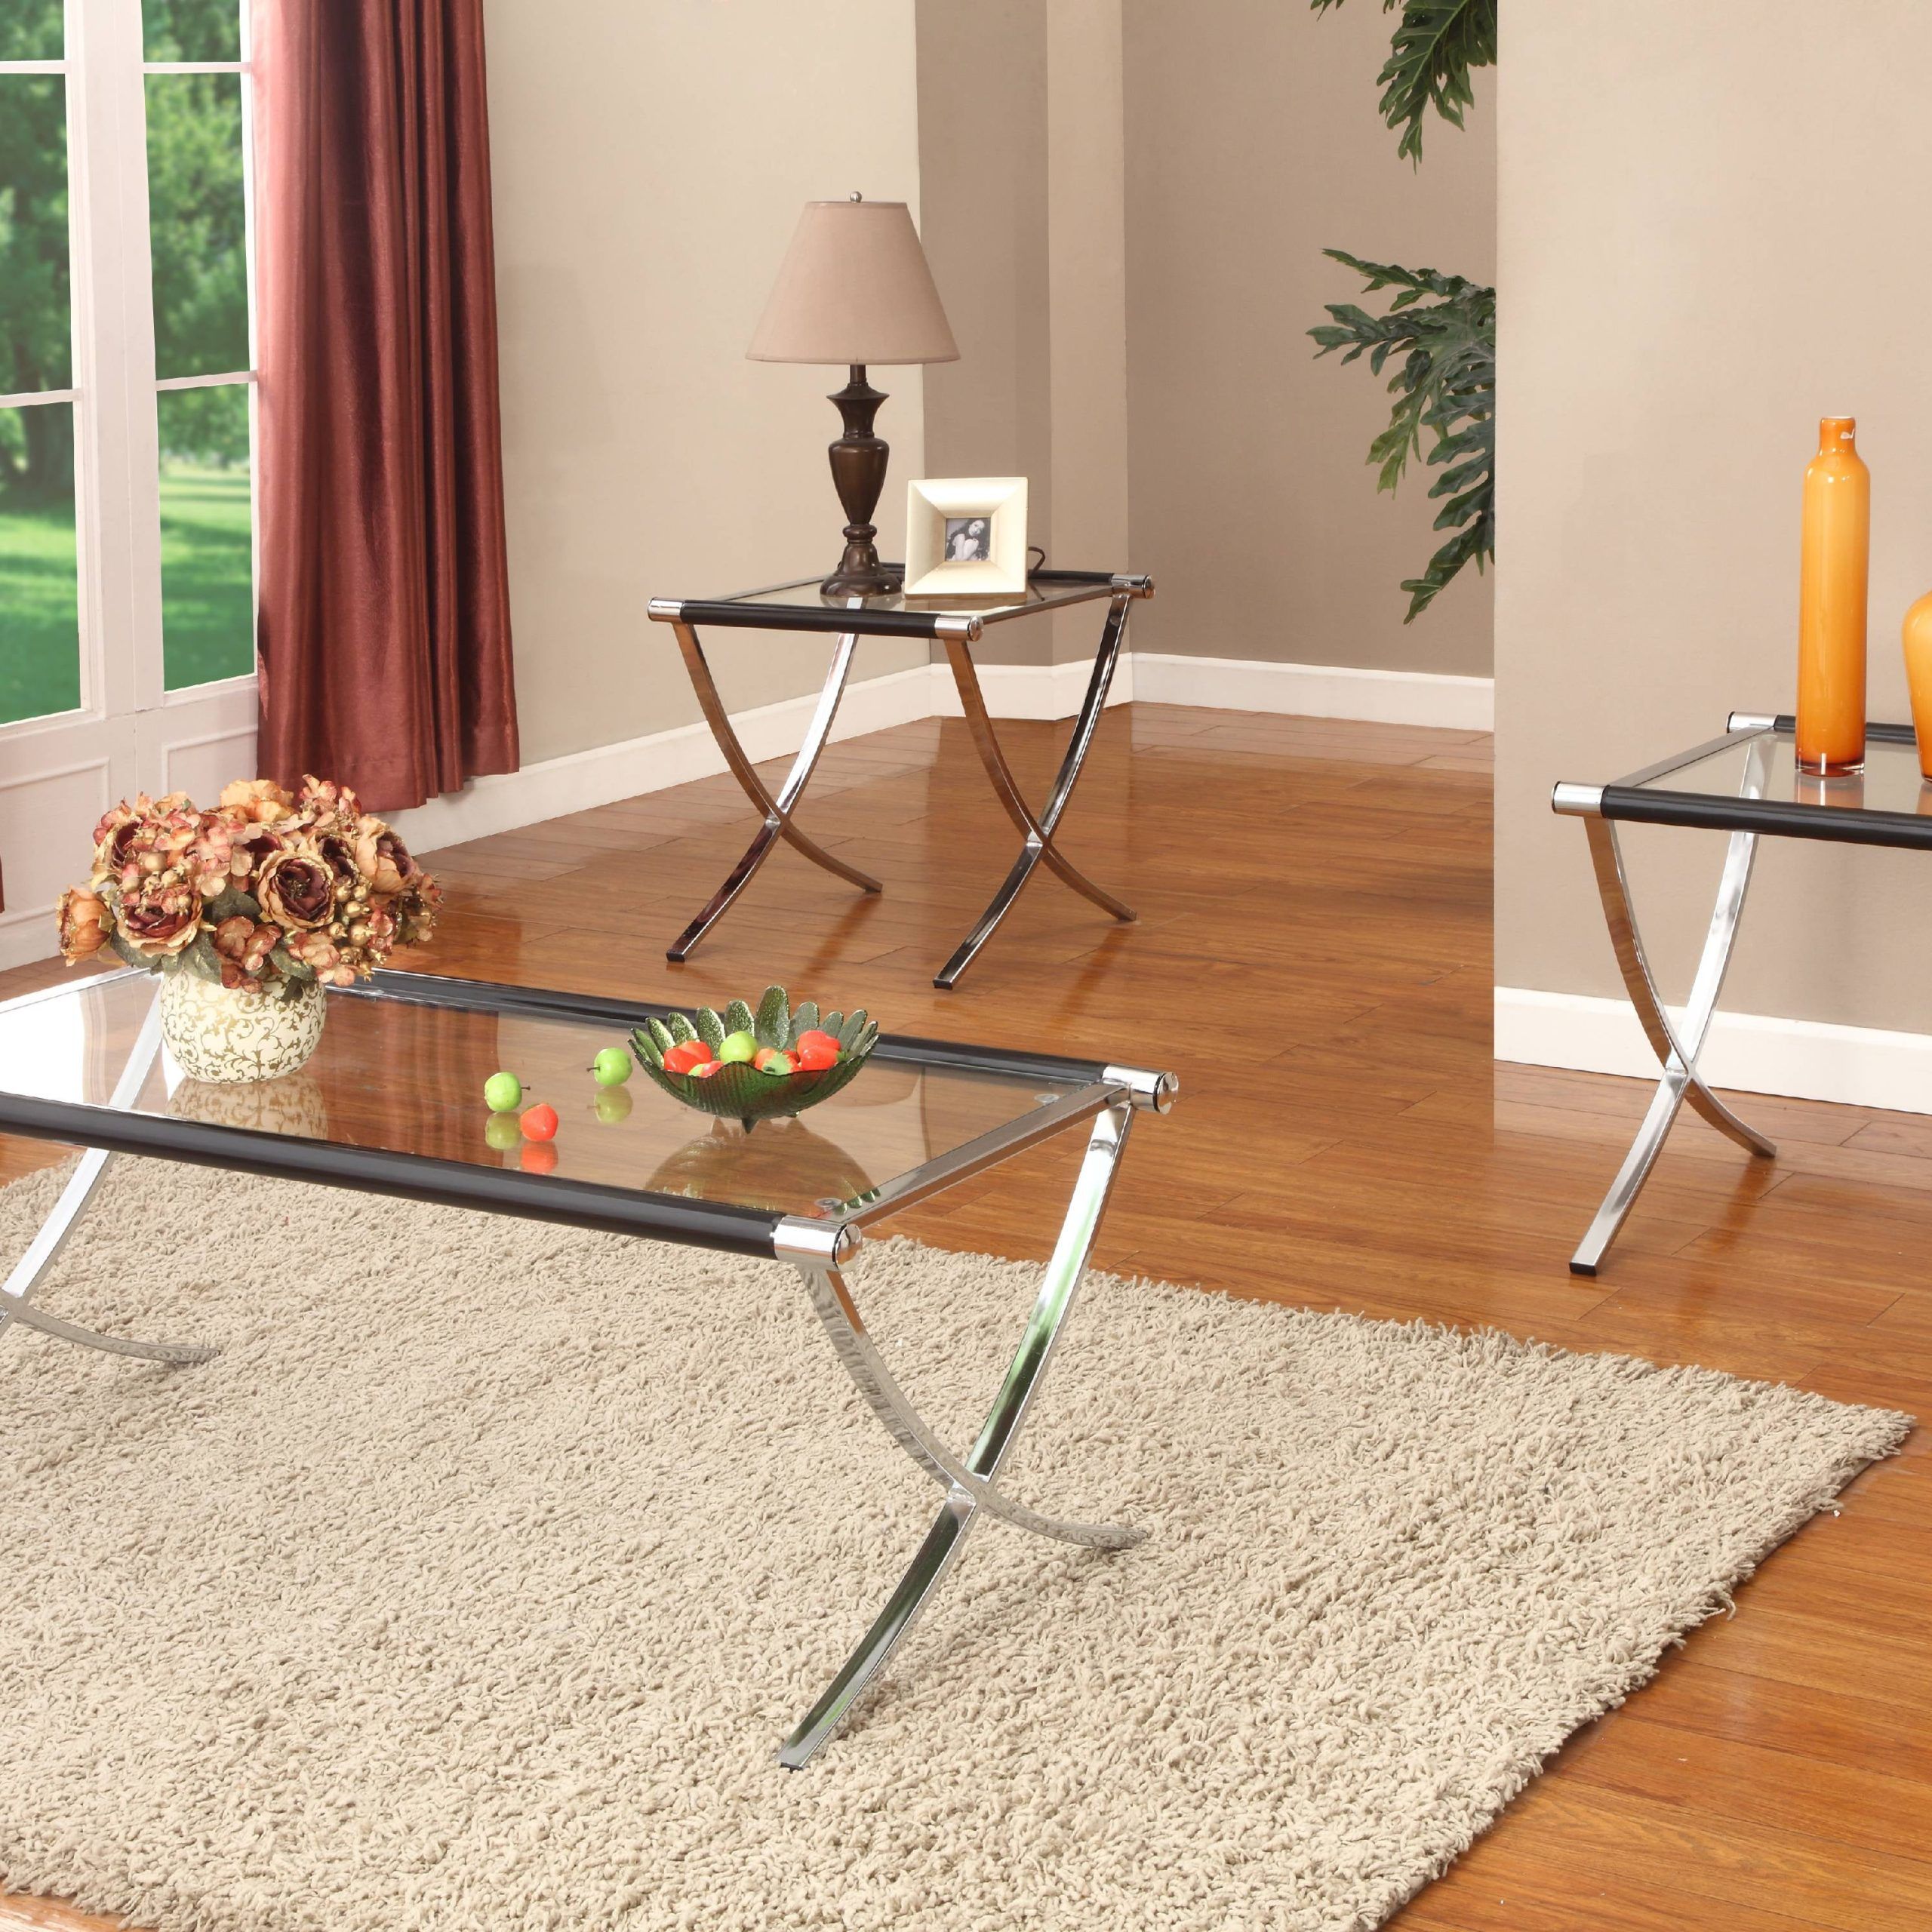 Peggie 3 Piece Coffee Table Set, Chrome Metal Frame & Tempered Glass Throughout Glossy Finished Metal Coffee Tables (View 12 of 20)